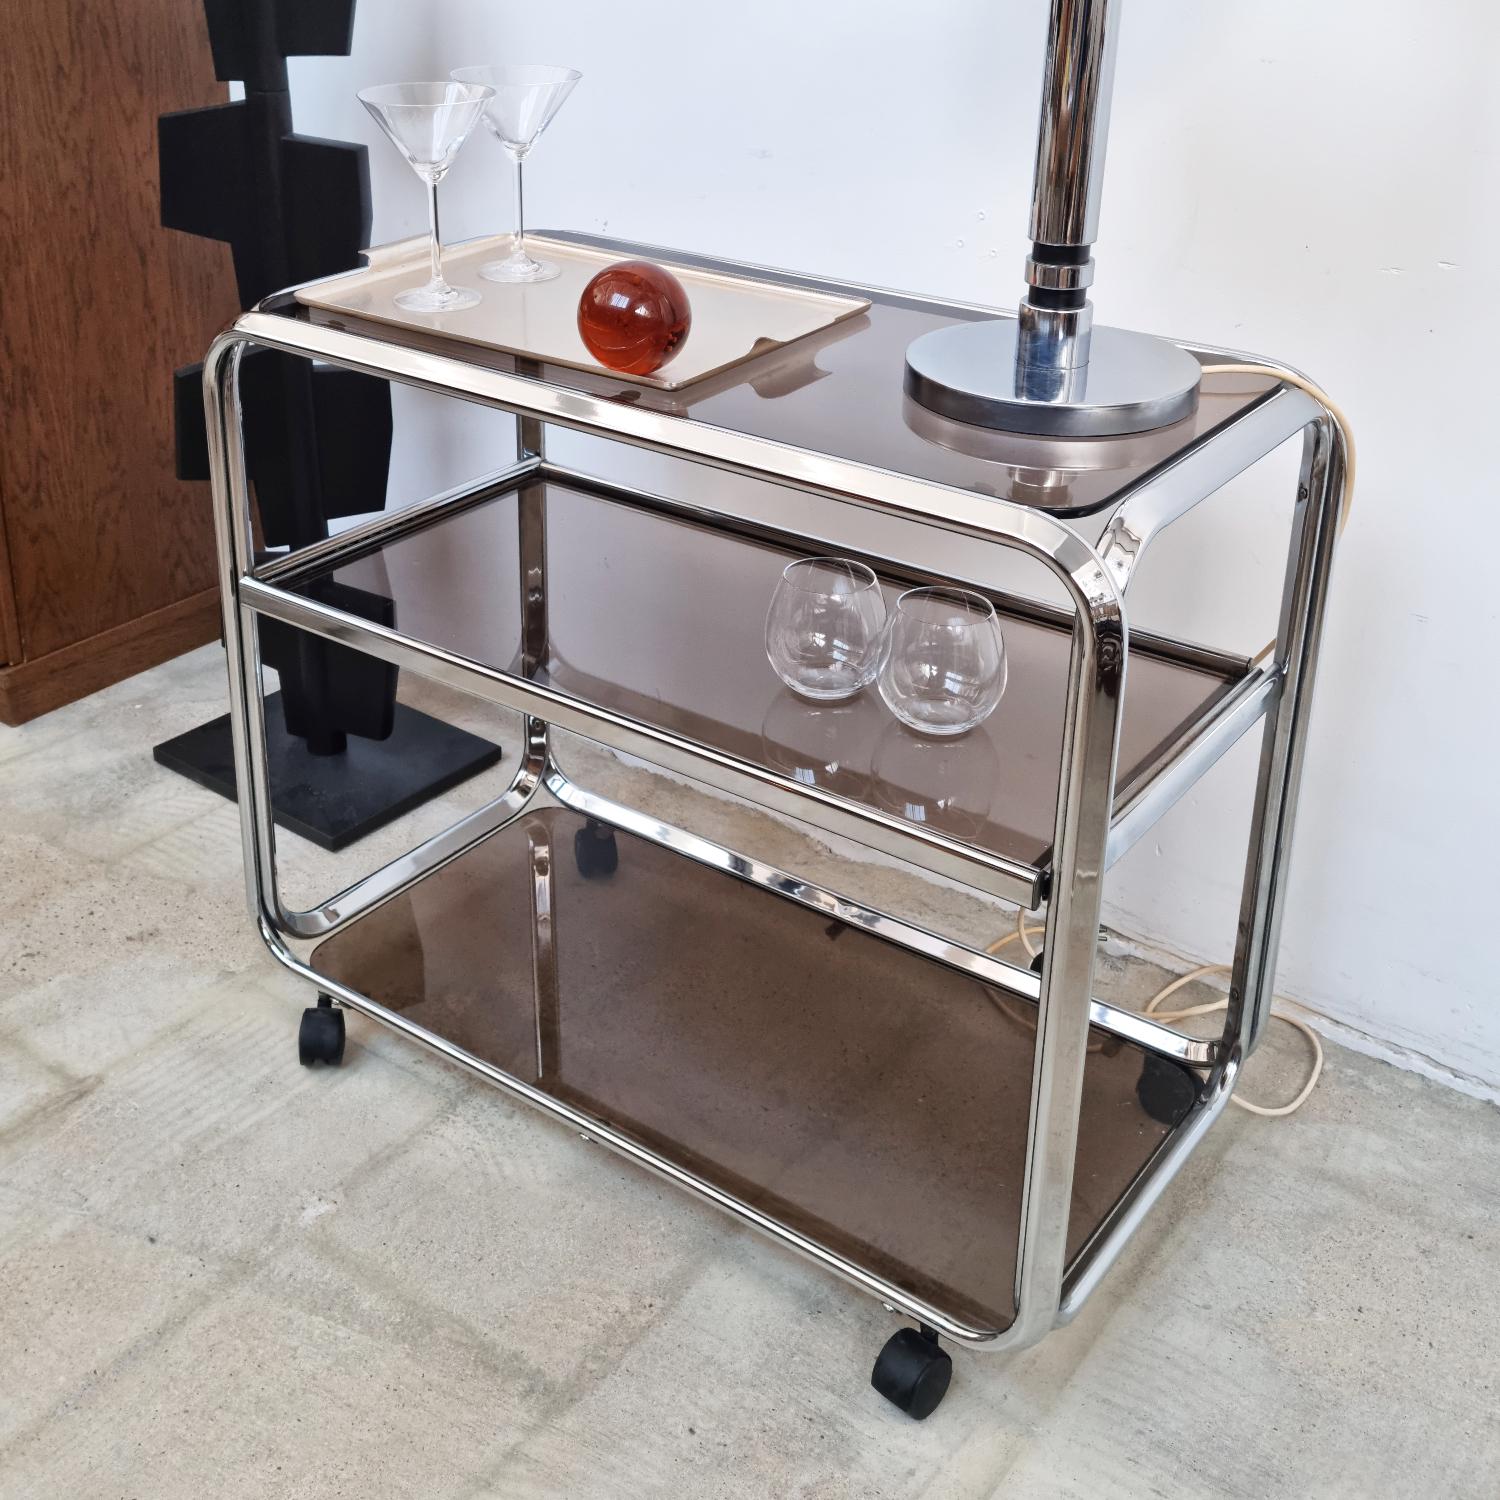 Introducing our Chrome Bar Cart from the 1970s, a true embodiment of vintage charm. Crafted with a sleek chrome frame and complemented by smoked glass shelves, this piece exudes an air of sophistication. The middle shelf offers versatility with its